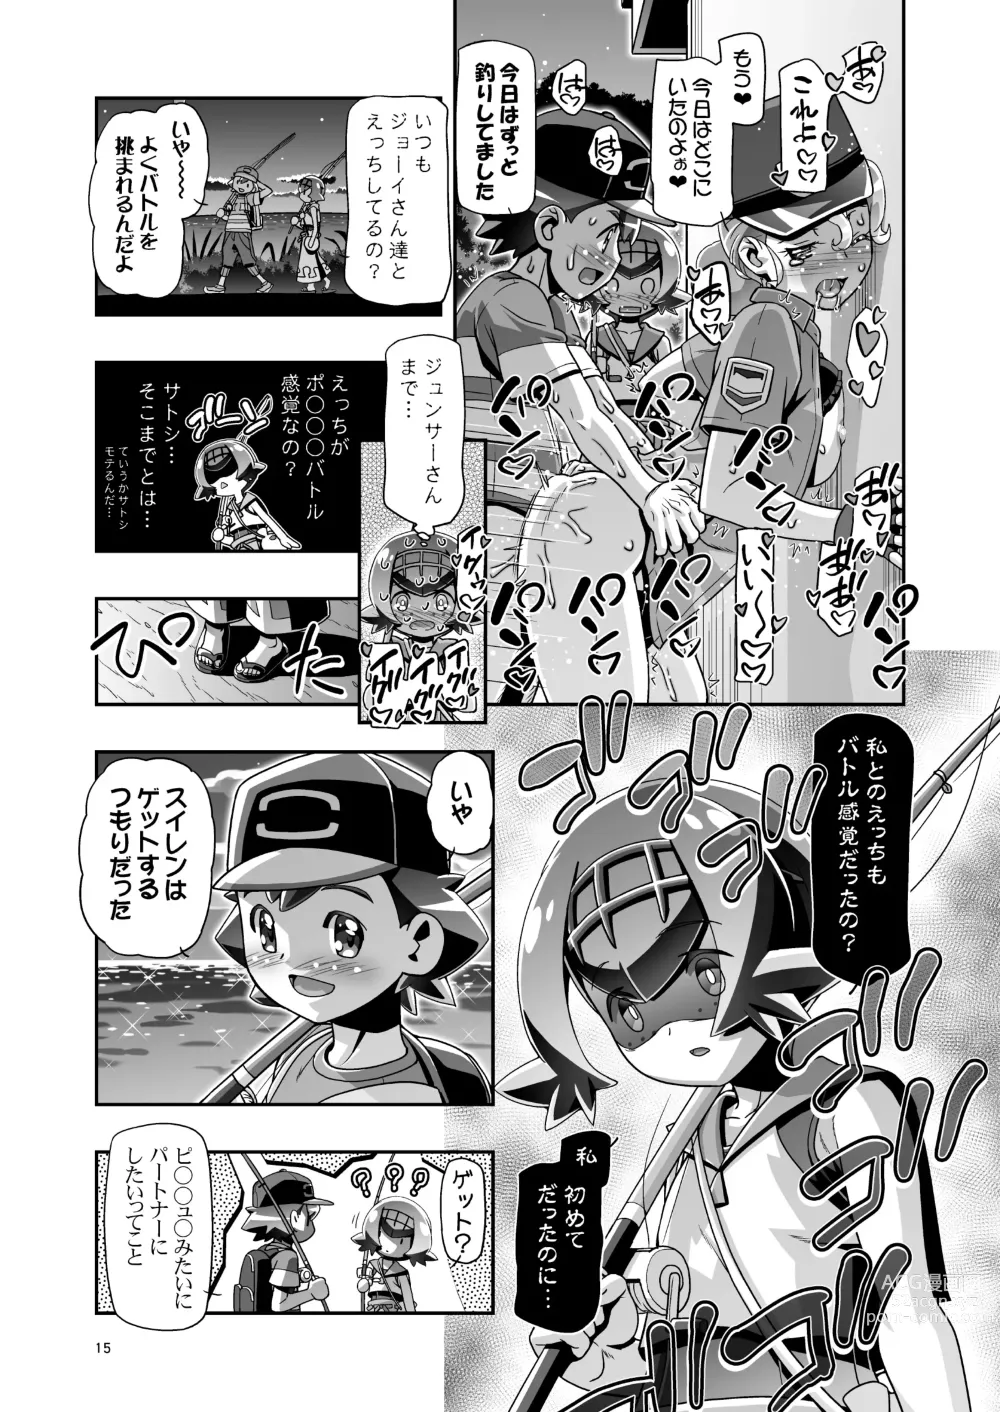 Page 14 of doujinshi PM GALS SUNMOON